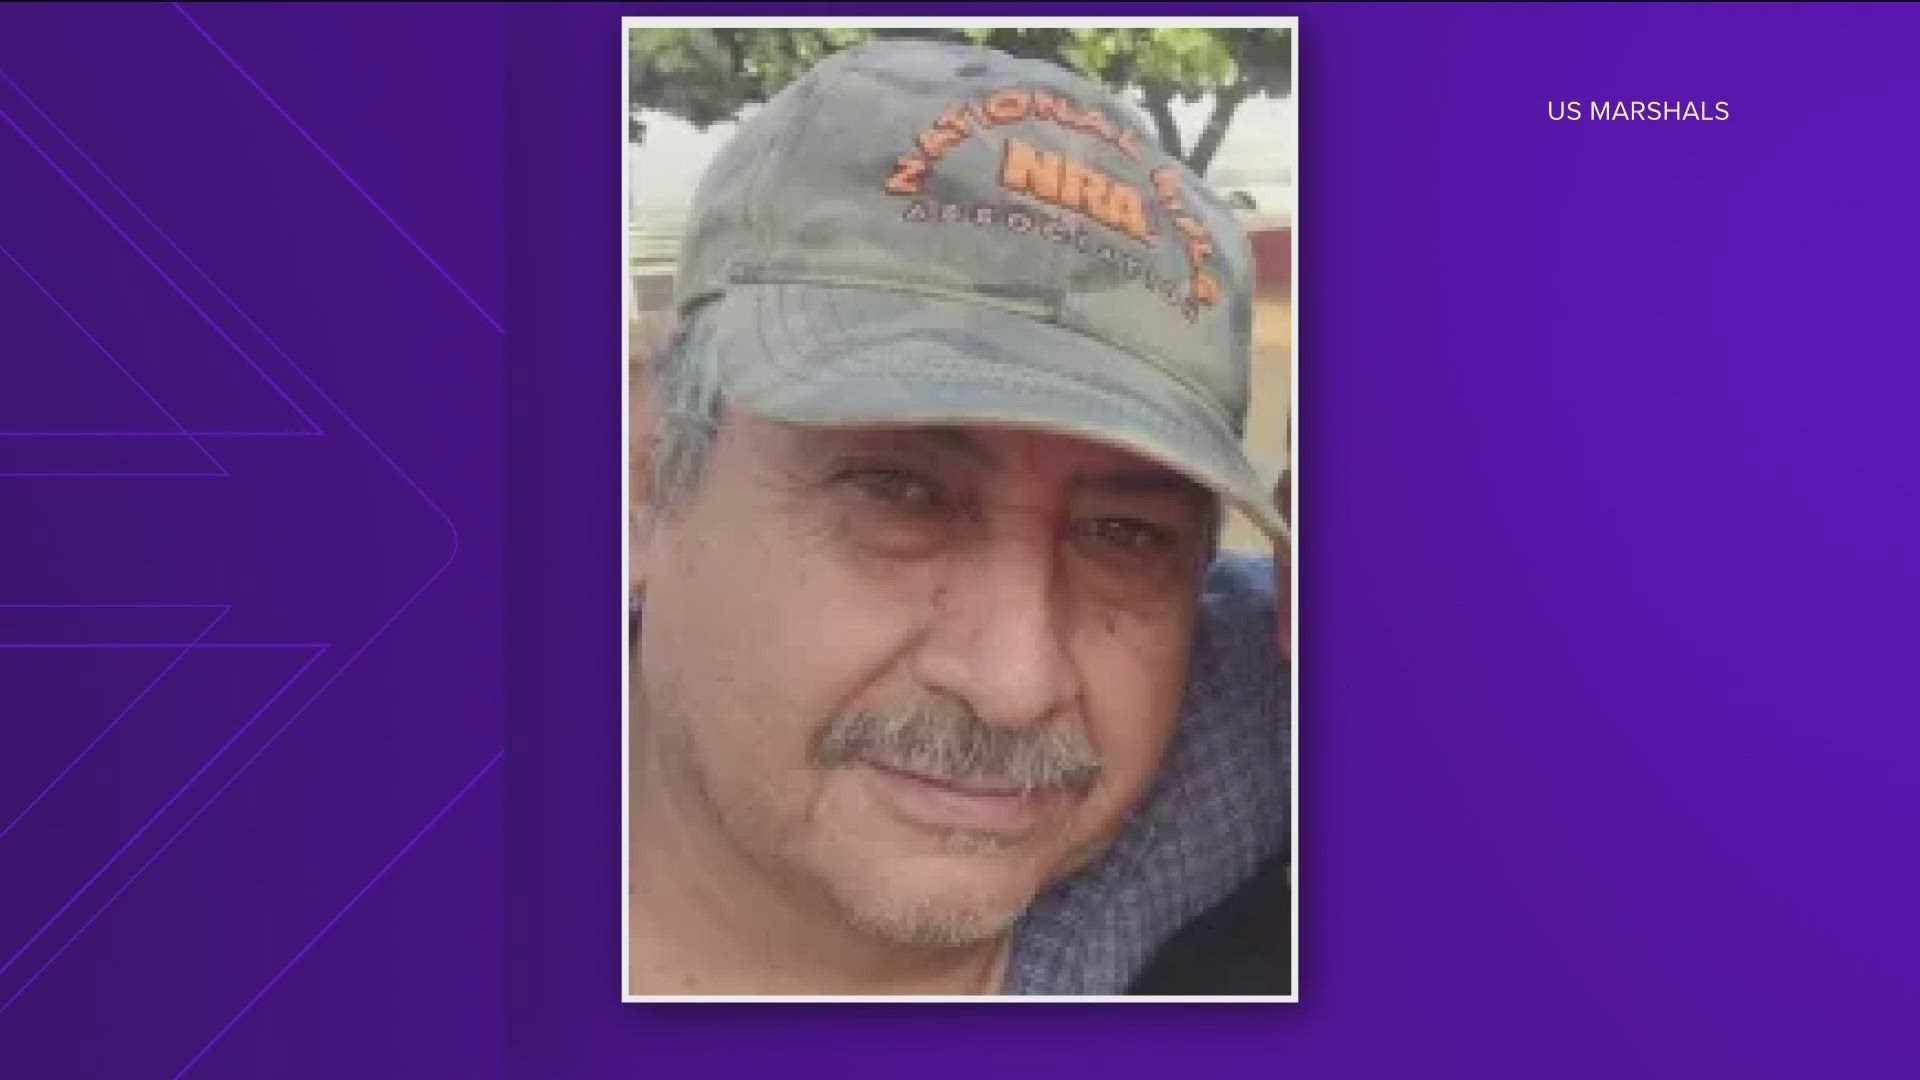 Jose Cardona, 59, has been wanted since June 25. The U.S. Marshals Service is seeking help from the public.